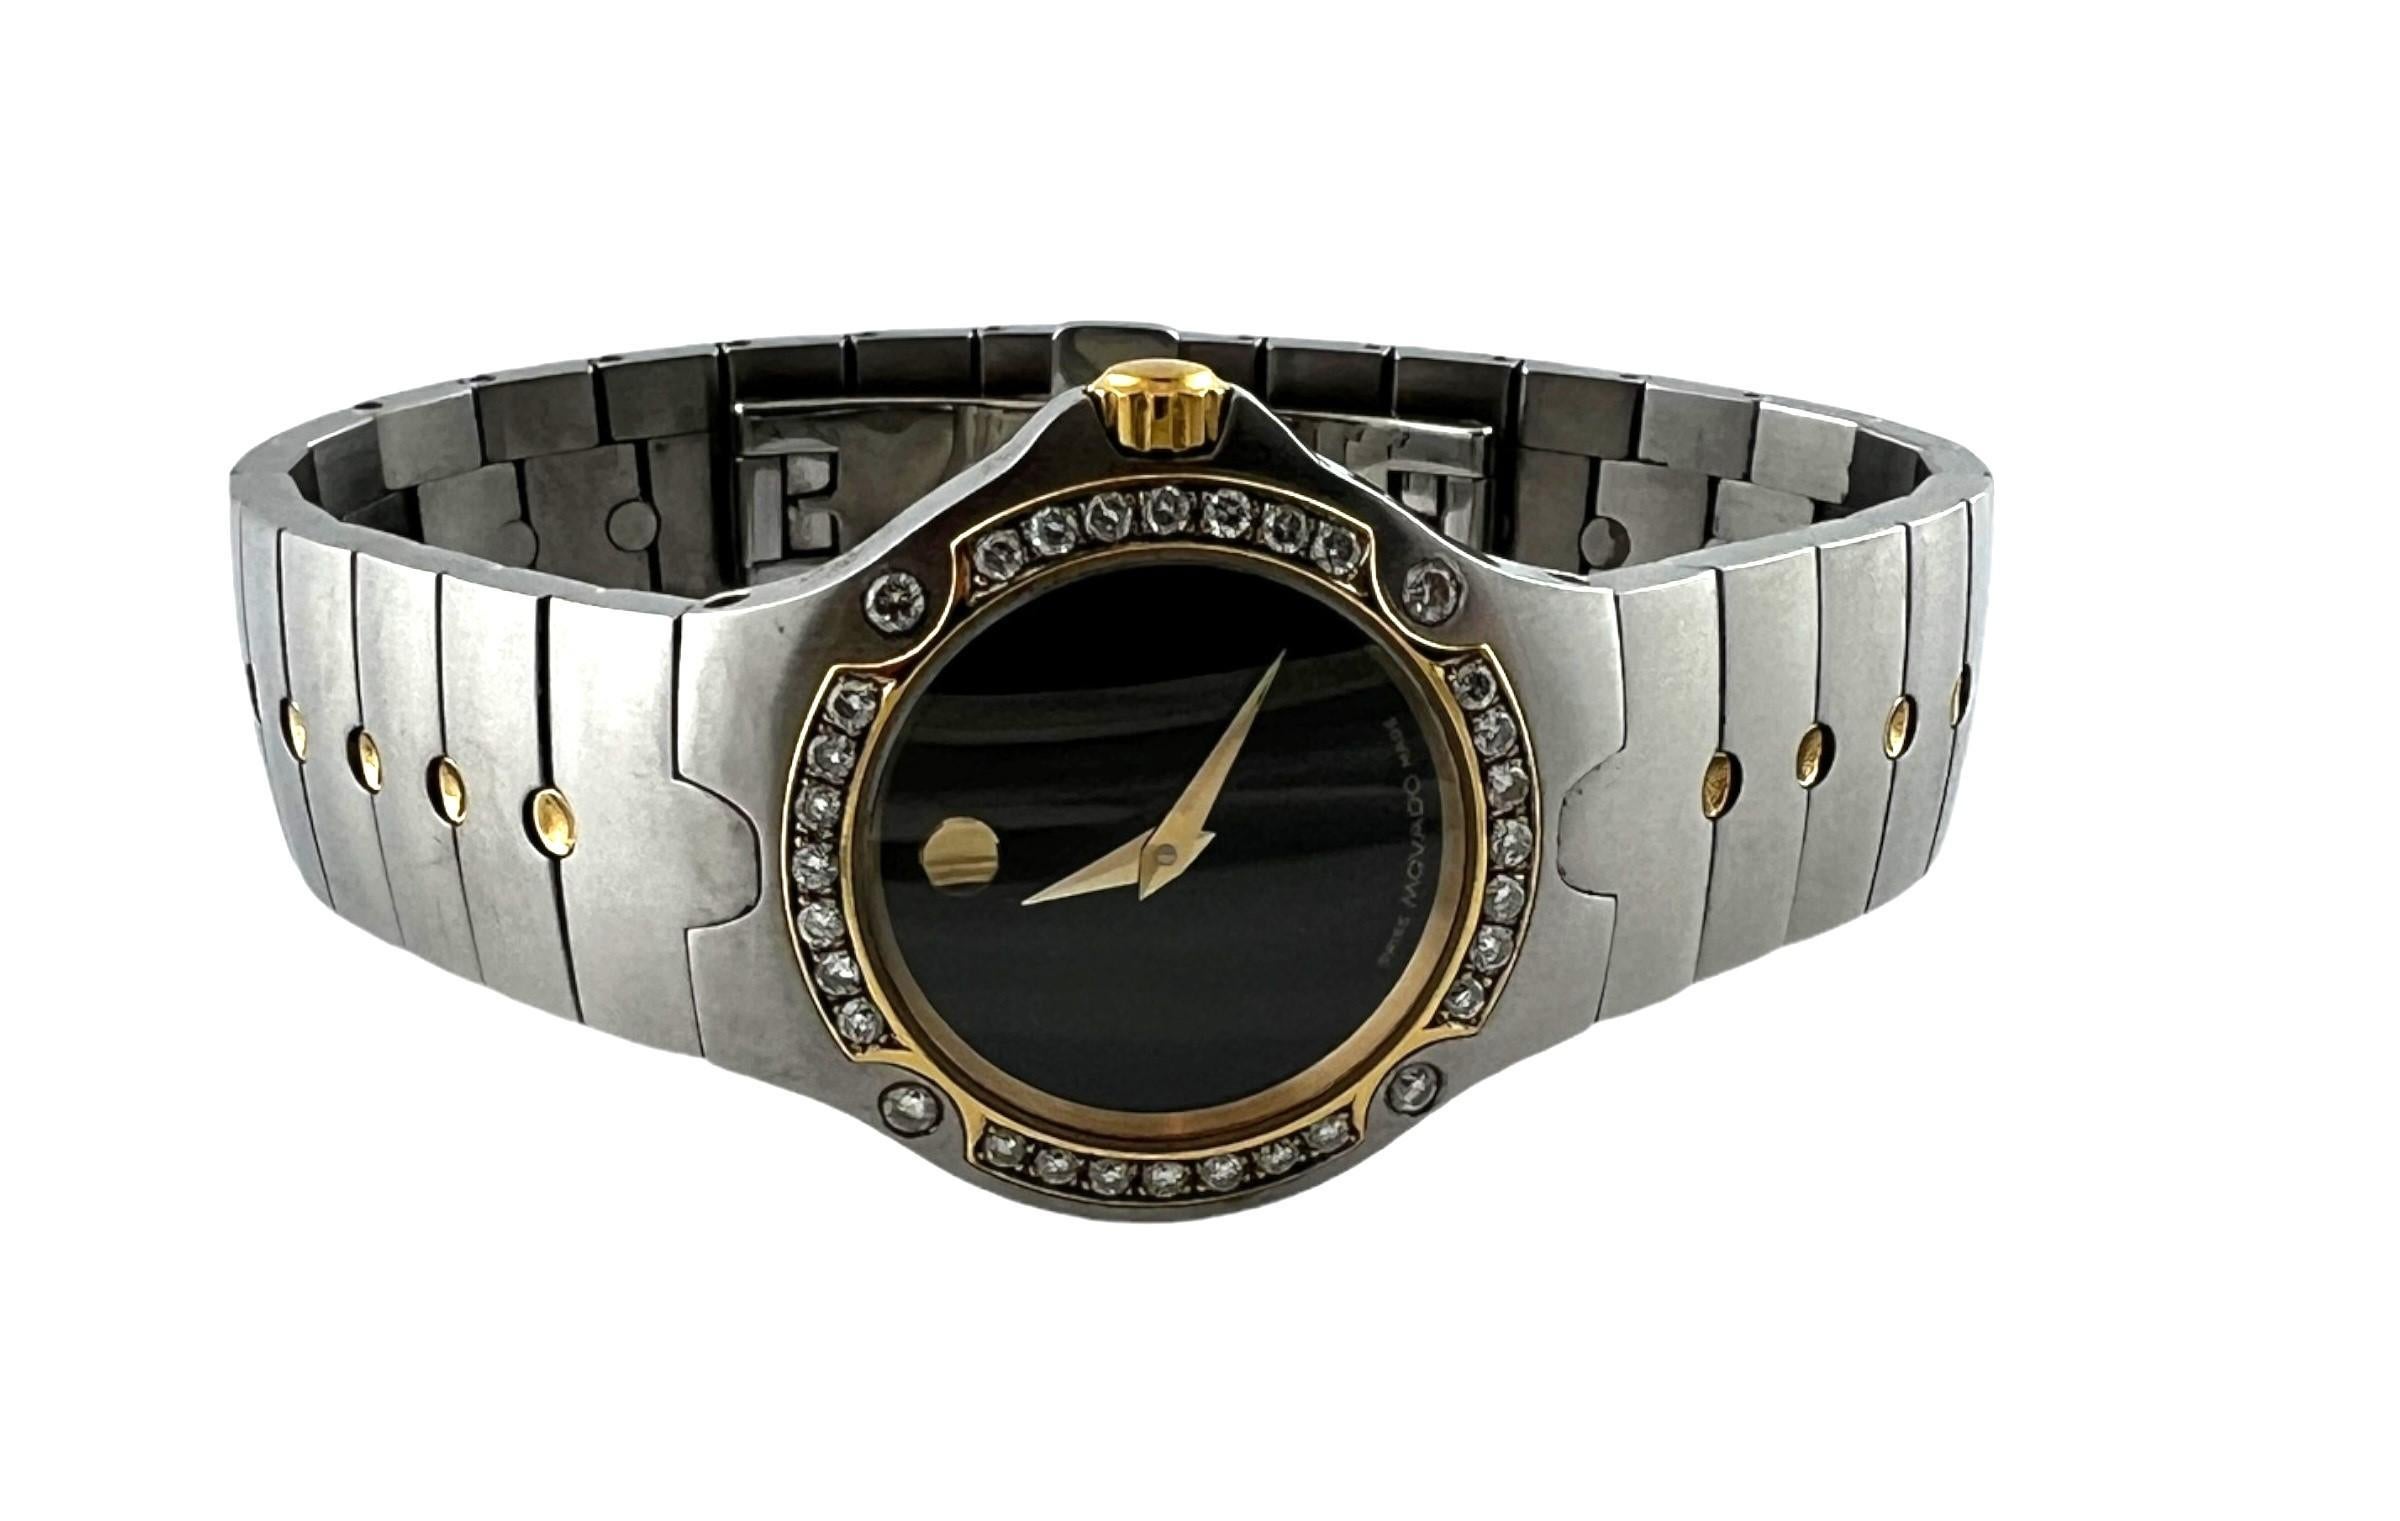 Movado Sports Edition Ladies Watch

Model: 81 G4 1851
Serial: 4895328

Black Dial with gold markers

27mm case

Custom Diamond bezel - diamonds on top and bottom were added after

Two tone - stainless and yellow gold plate

Quartz movement

Fits up